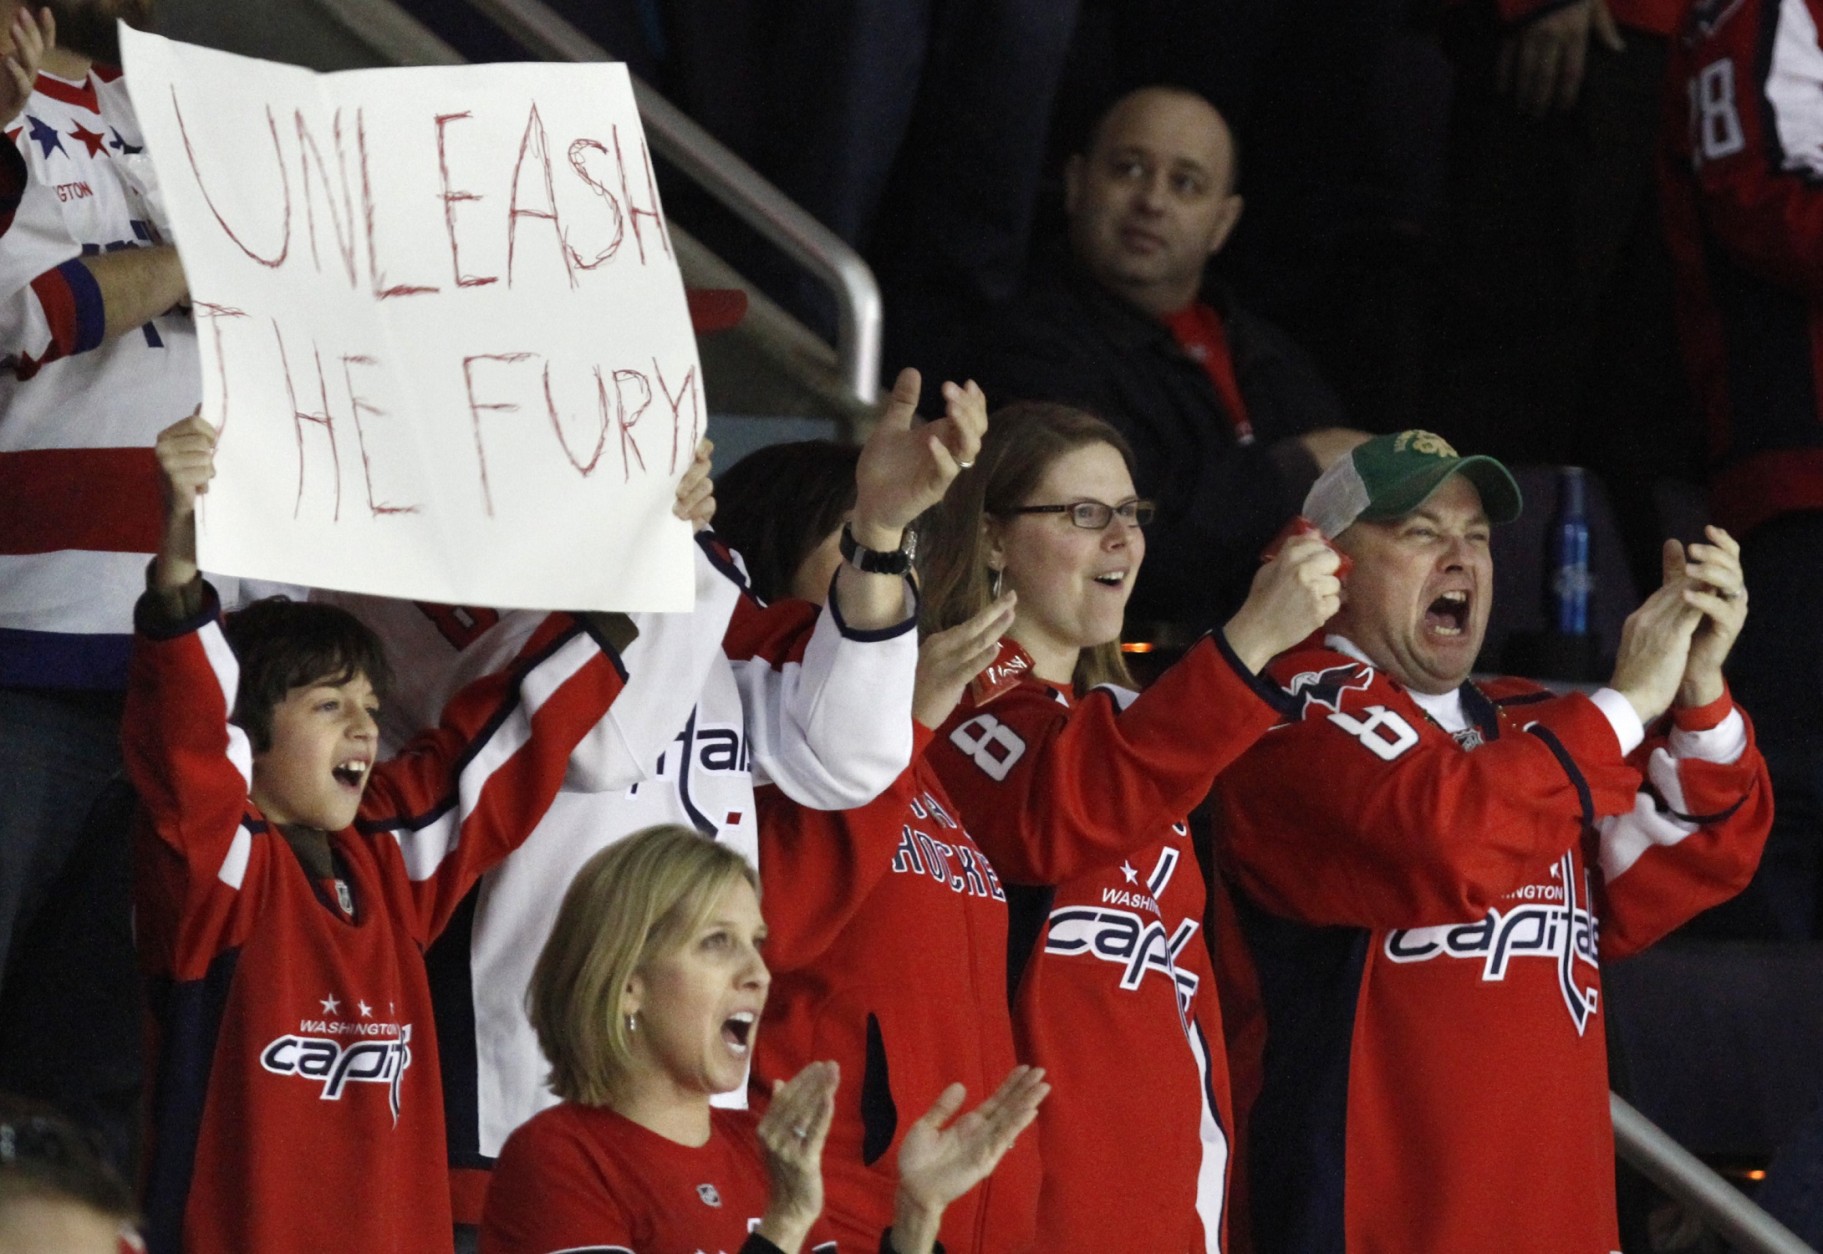 Fans cheer on the Washington Capitals during the third period of an NHL hockey game against the Chicago Blackhawks at the Verizon Center in Washington, on Sunday, March 13, 2011. The Capitals won 4-3 for their eighth straight victory. (AP Photo/Jacquelyn Martin)